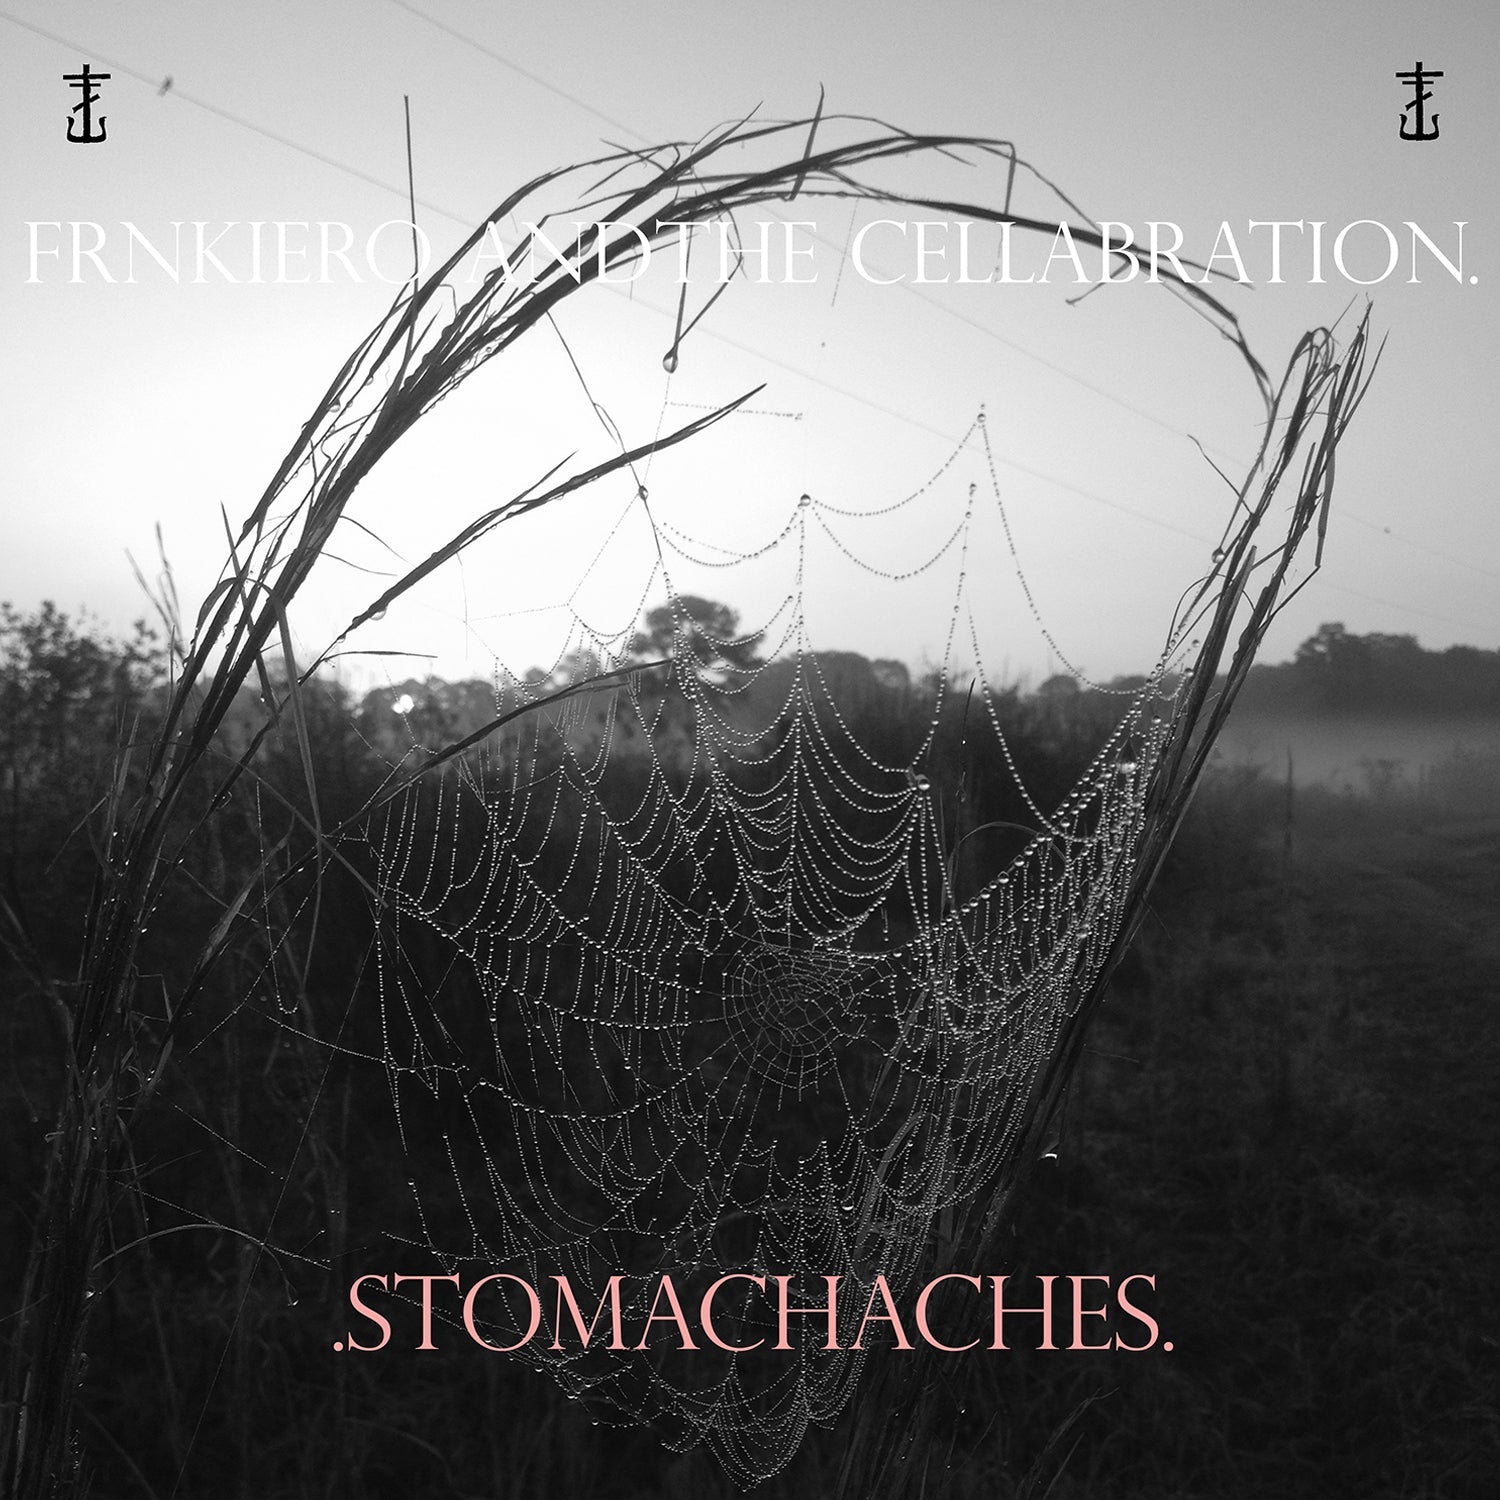 [DAMAGED] Frnkiero & The Cellabration - Stomachaches